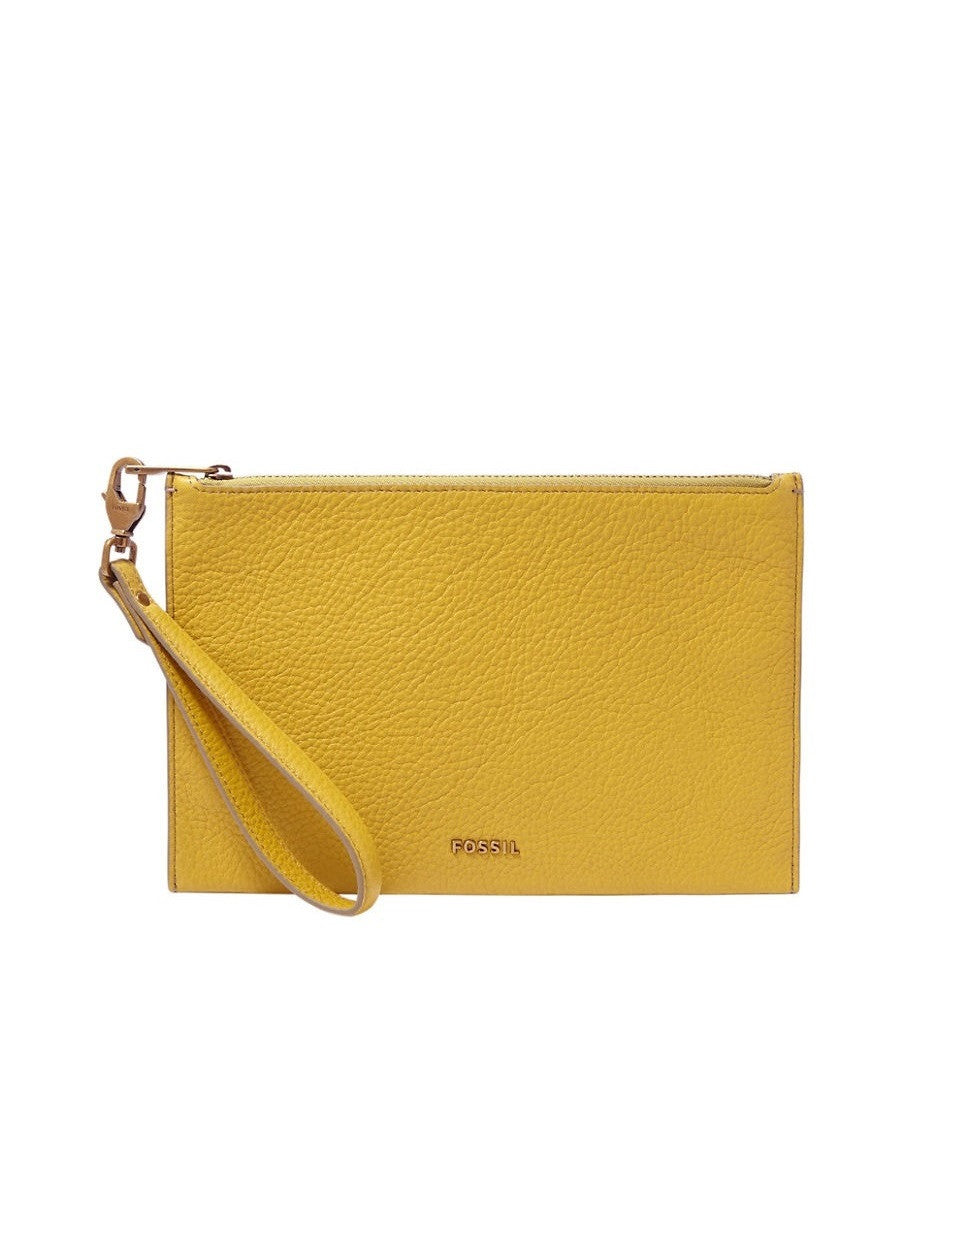 Fossil Gold Leather Wristlet